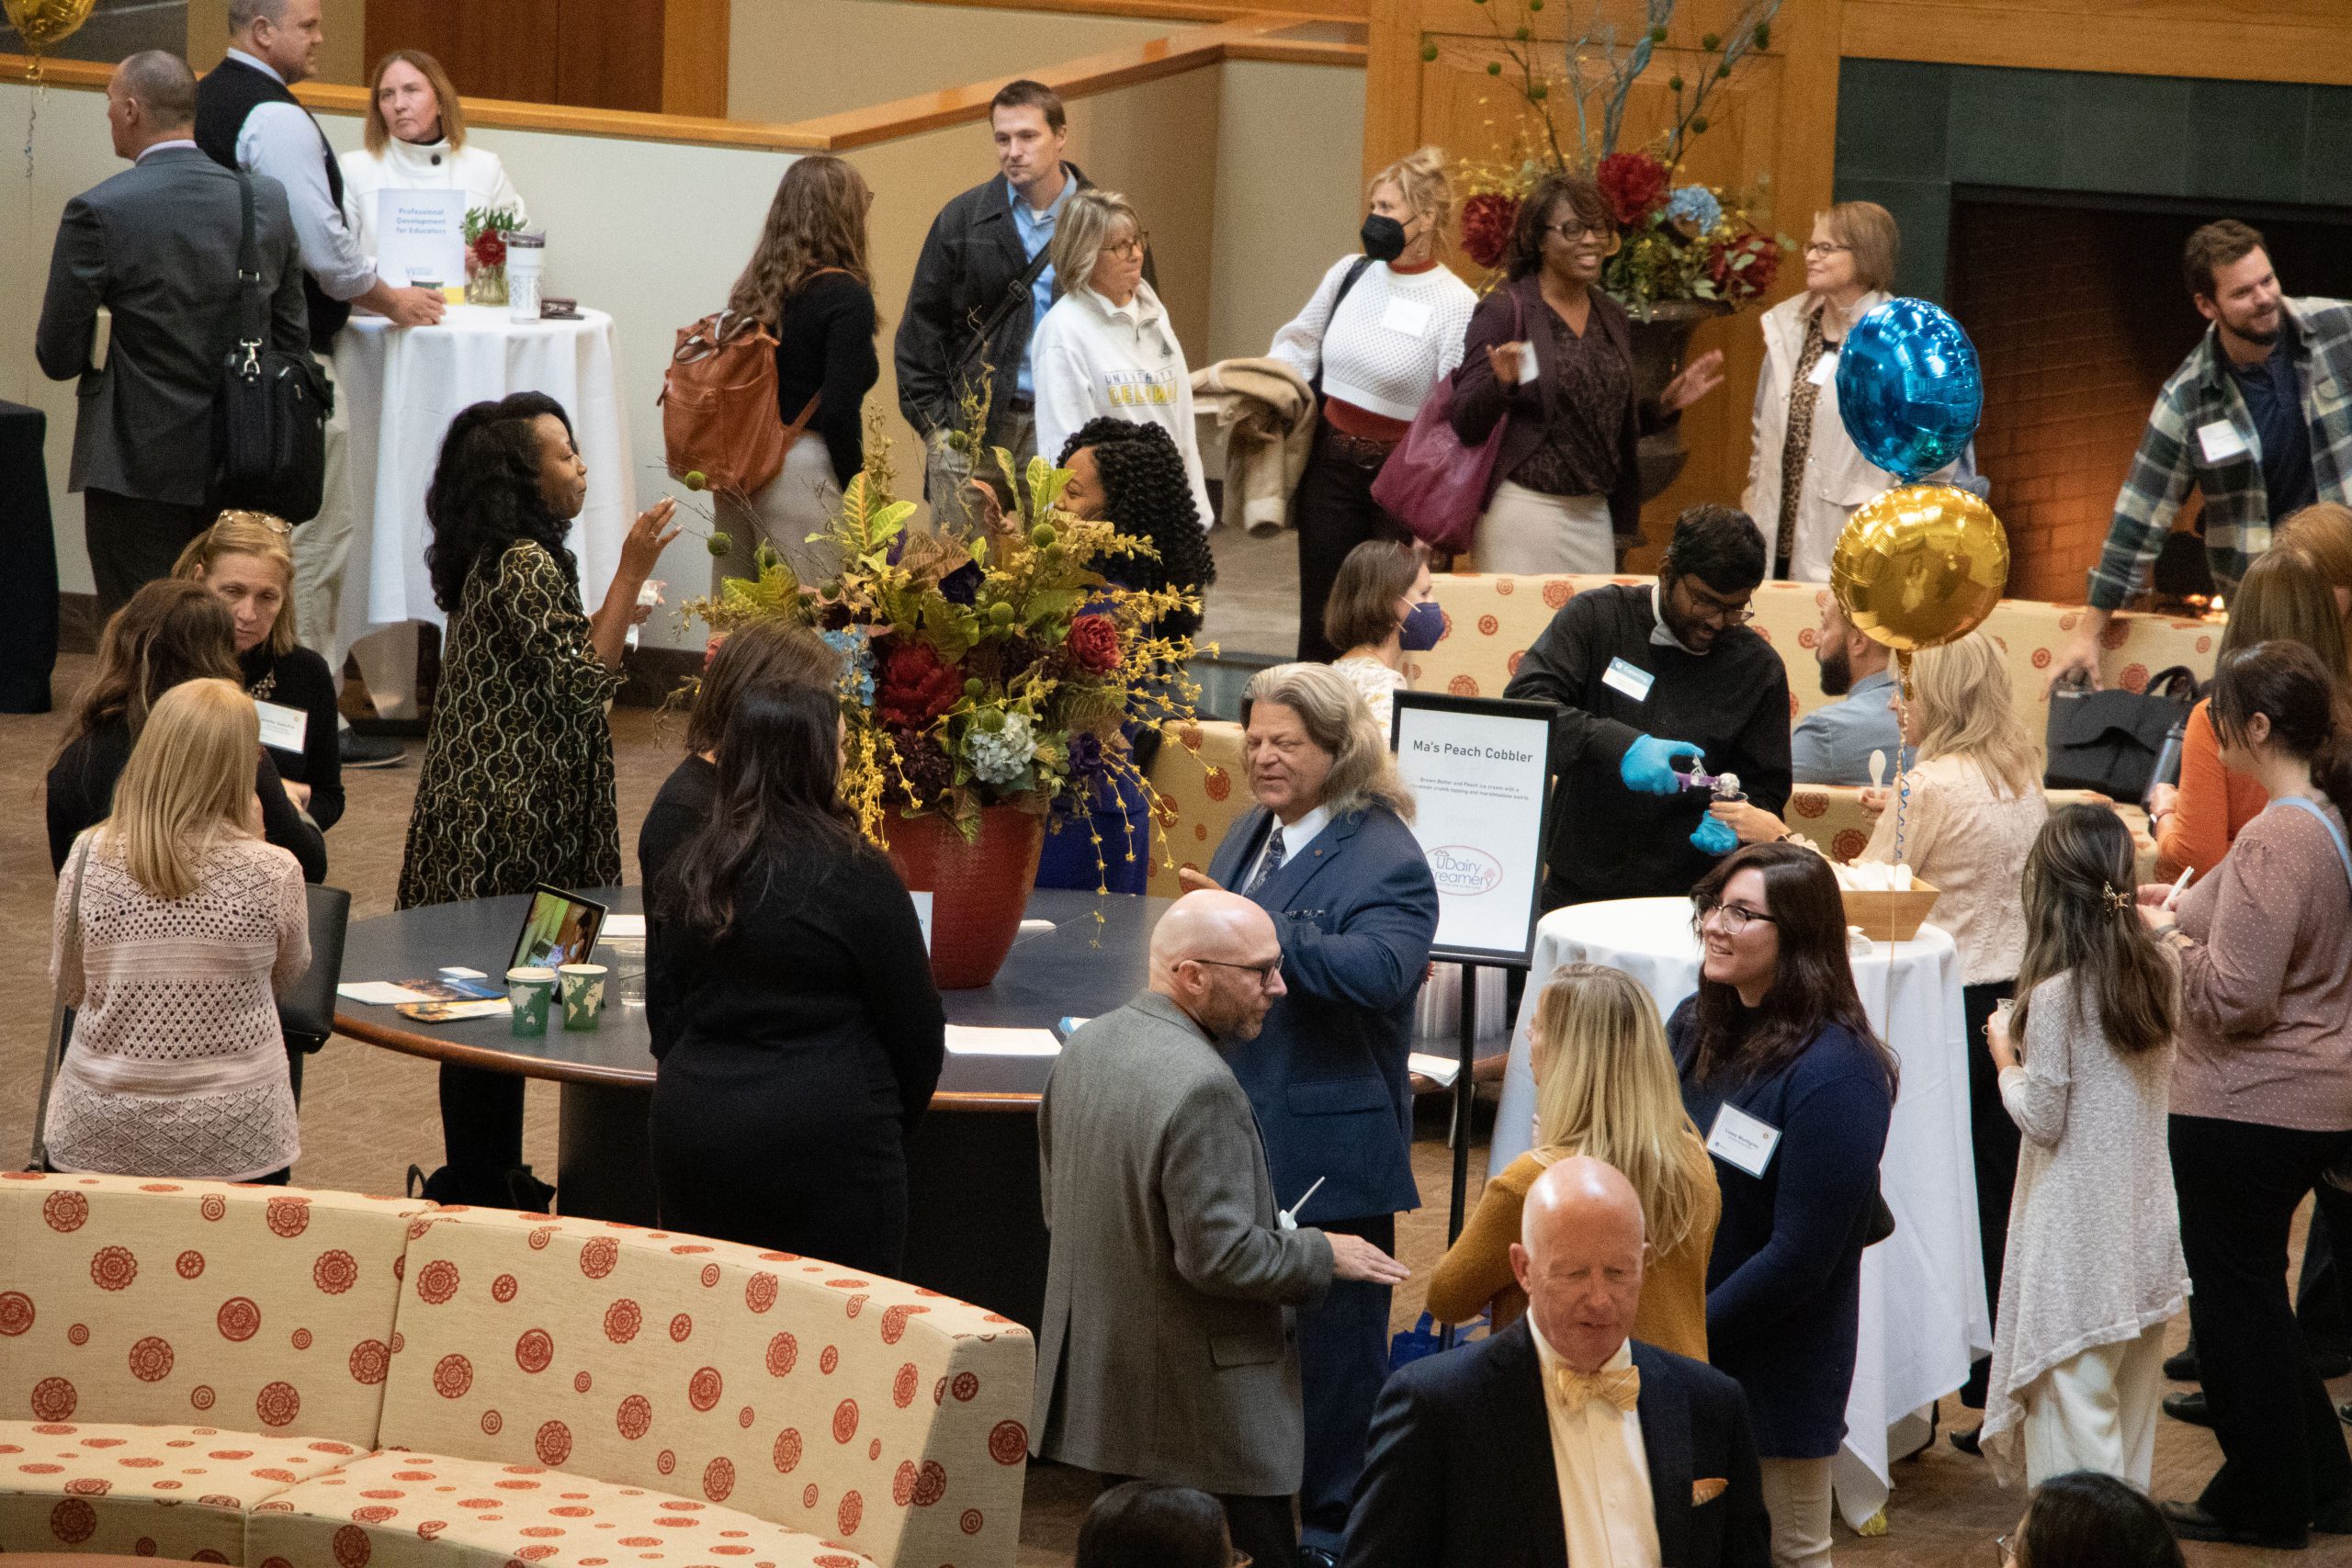 More than 140 Delaware school leaders, district partners, government representatives and University of Delaware faculty and staff attended the launch of UD’s School Success Center on Oct. 21, demonstrating a shared commitment to school success in Delaware.